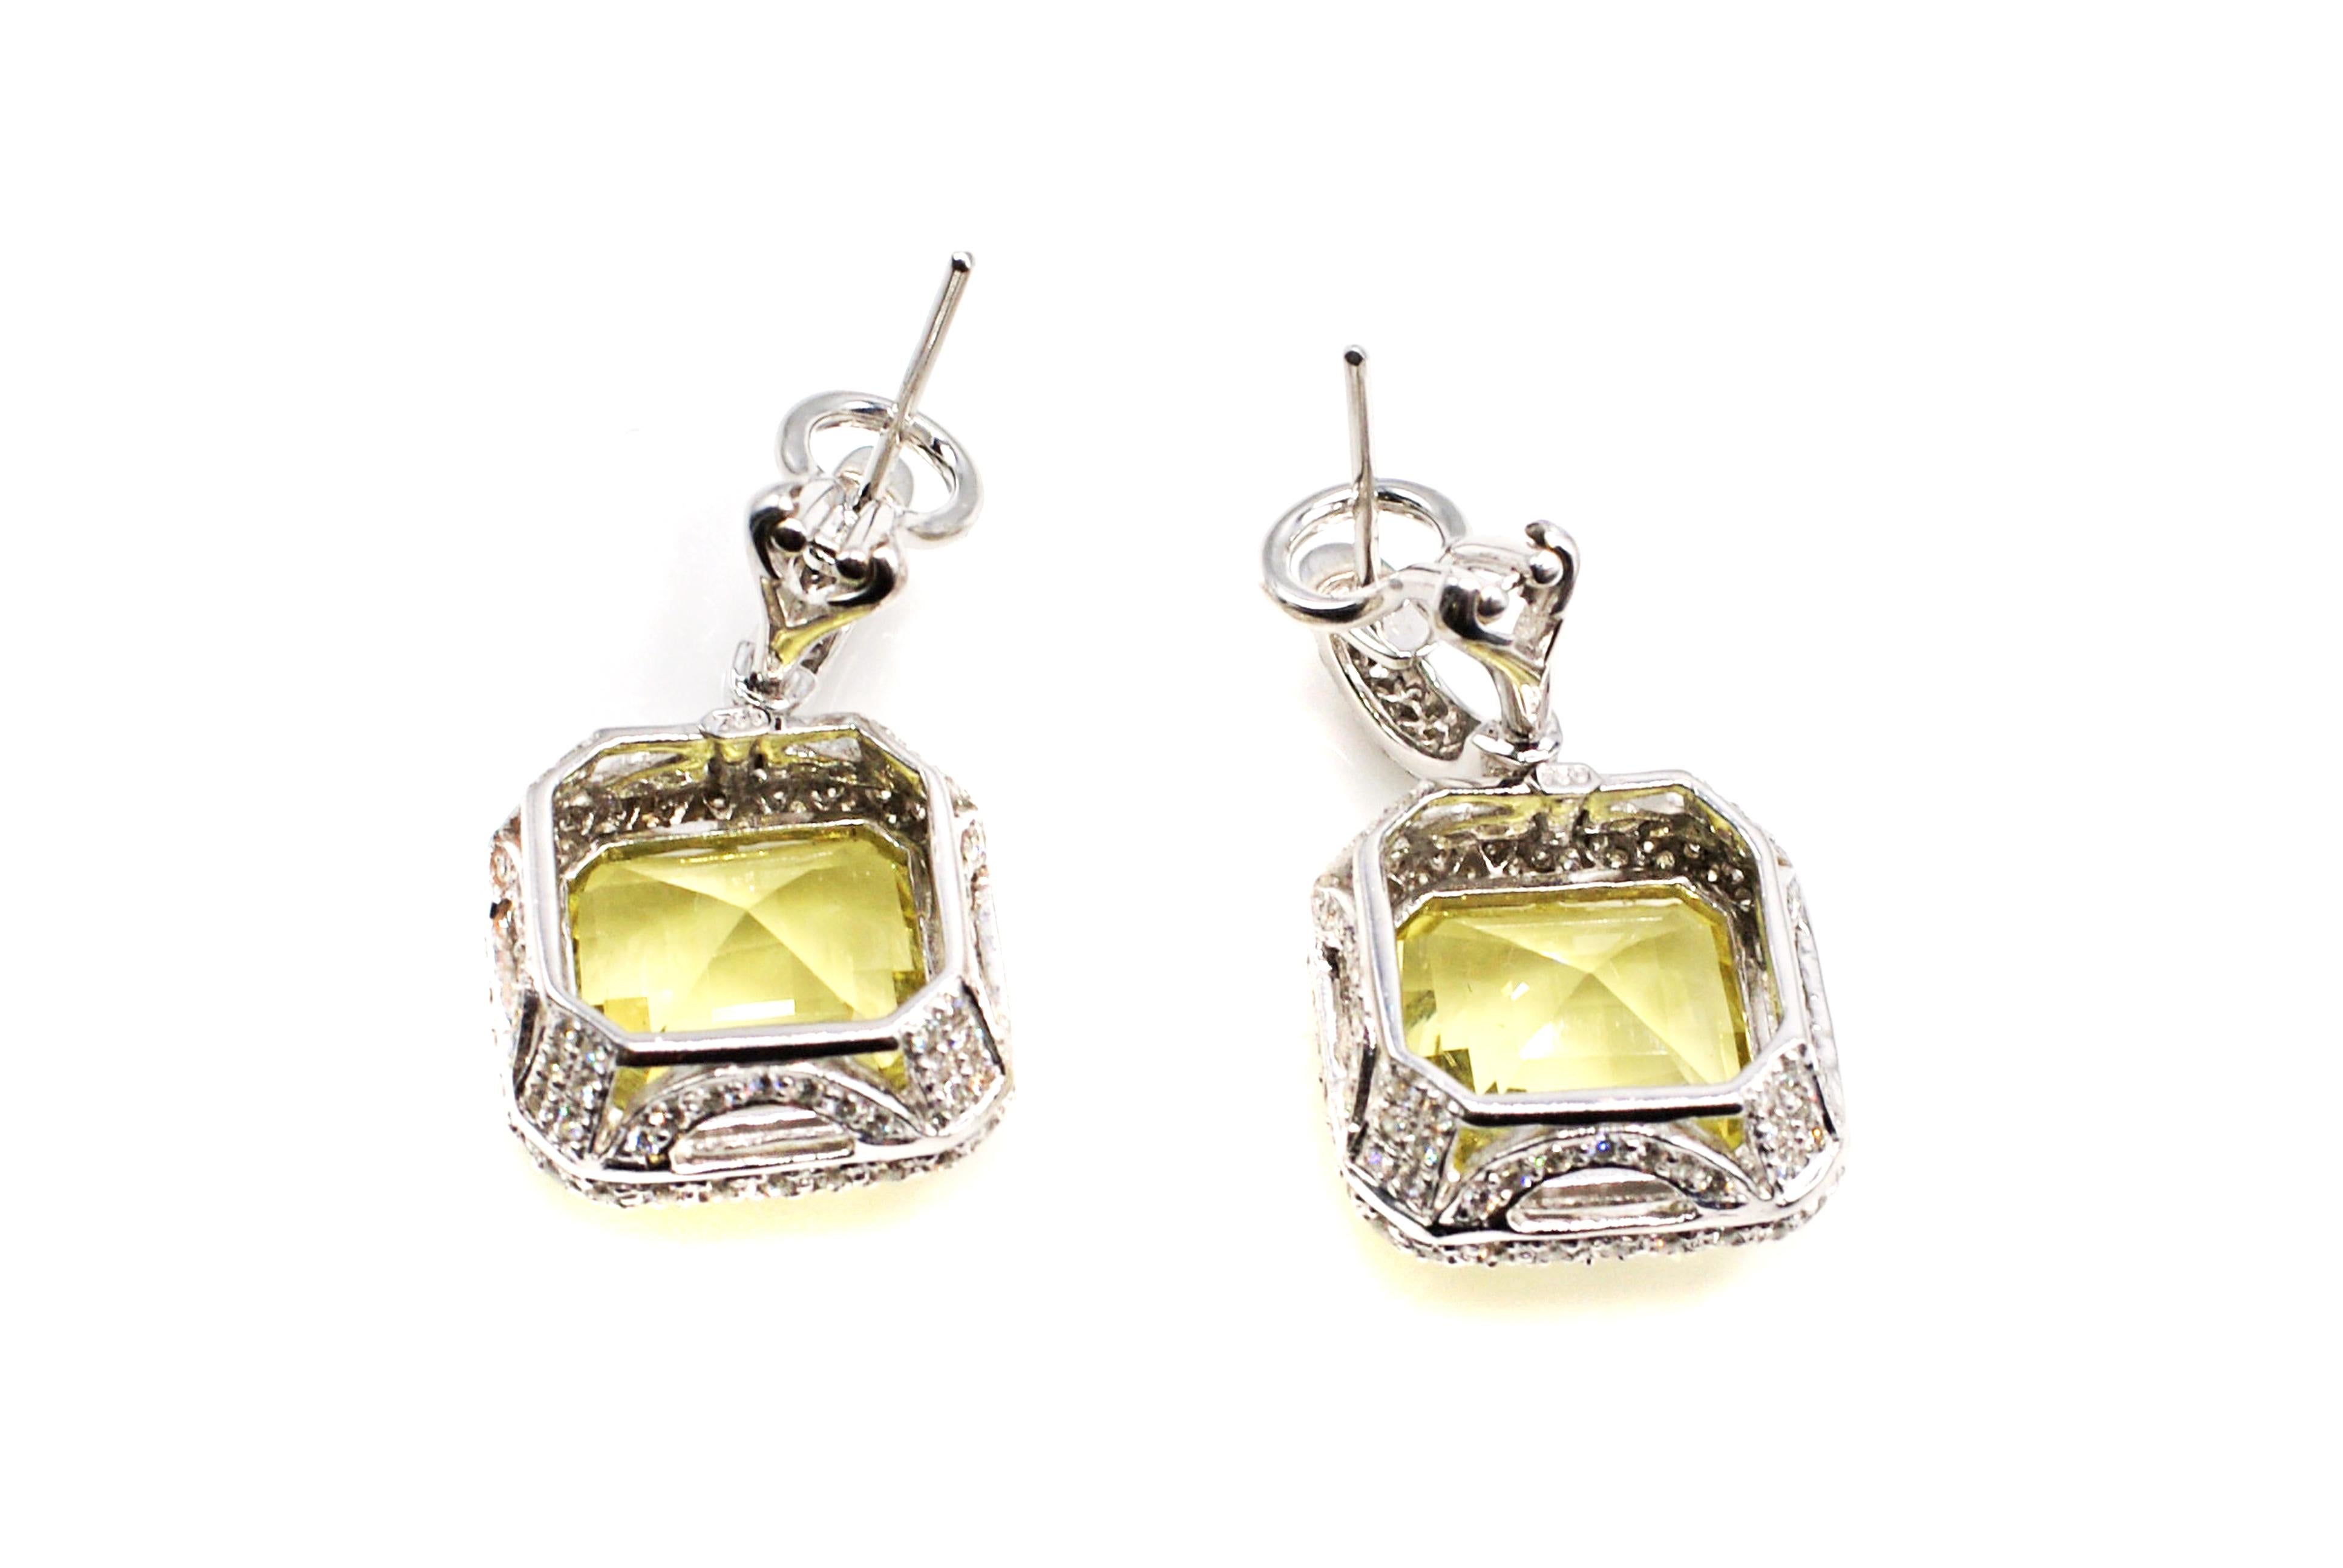 These vivid lemon citrines are perfectly matched in cut and color, measured to weigh approximately 8.5 carats each, with a total approximate weight of 17 carats.The beautiful mixed step-cut give these gemstones incredible life and fire. While the